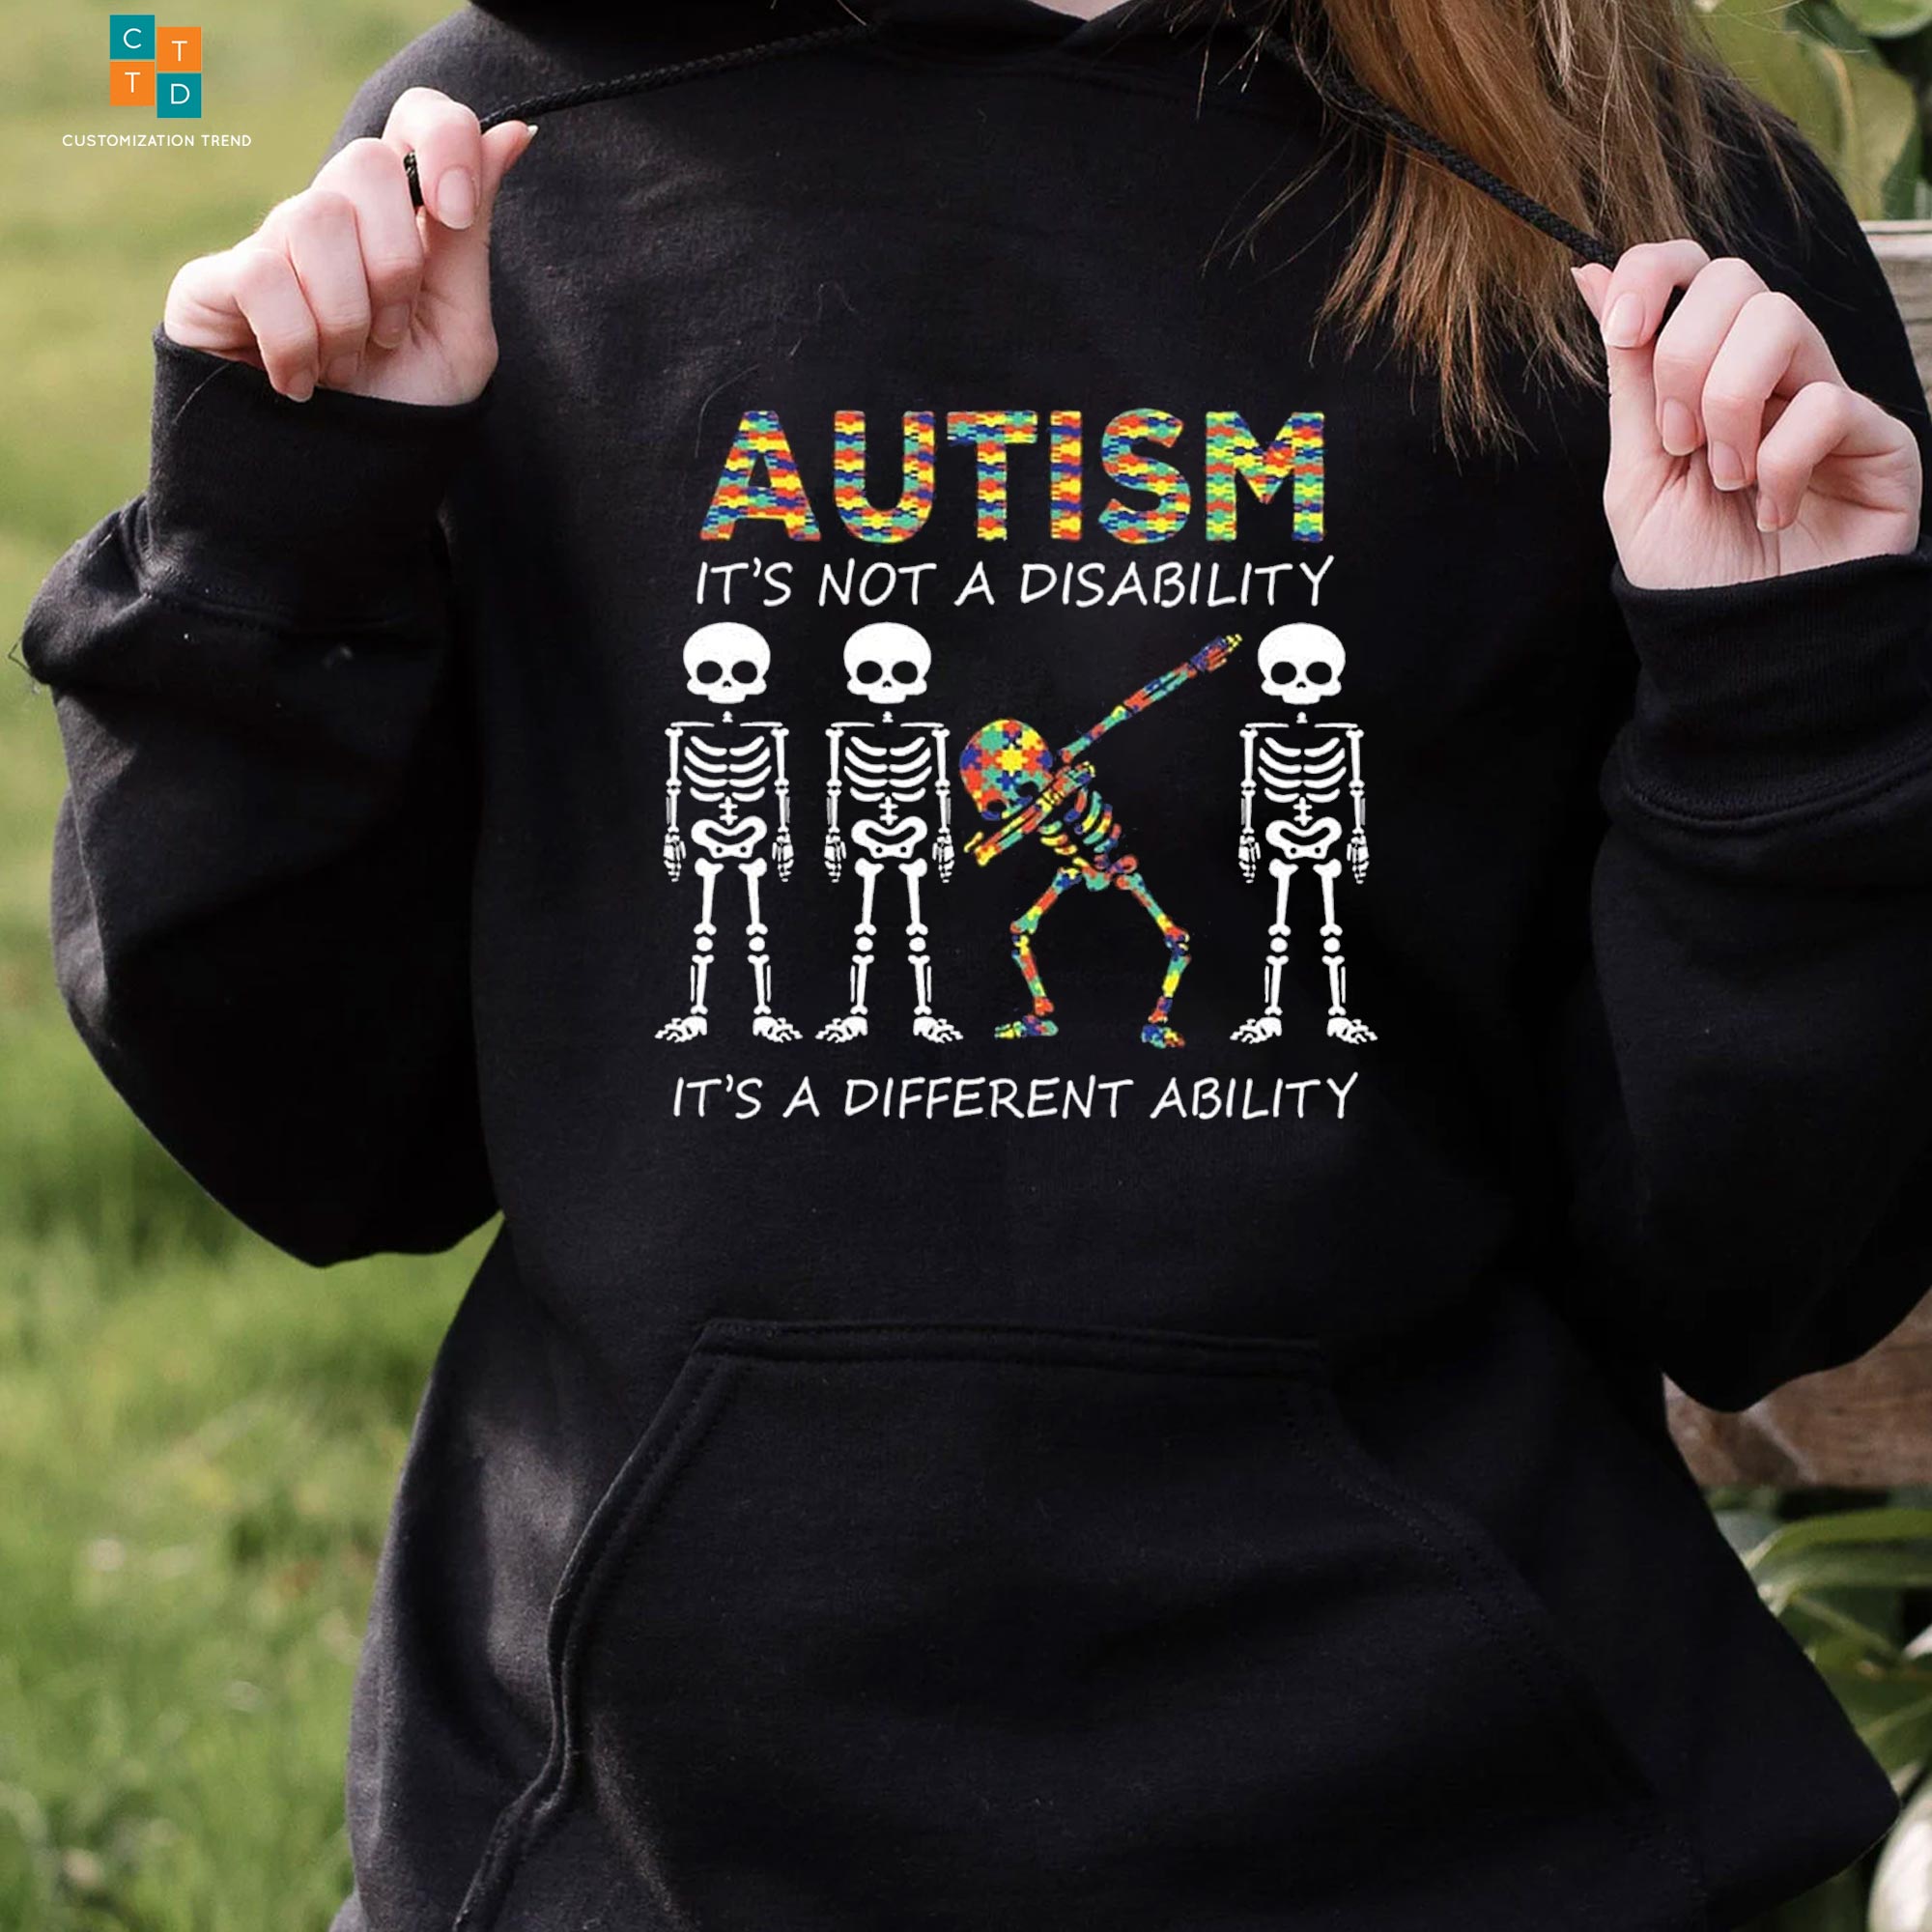 Autism It’s Not A Disability  Hoodie , Shirt